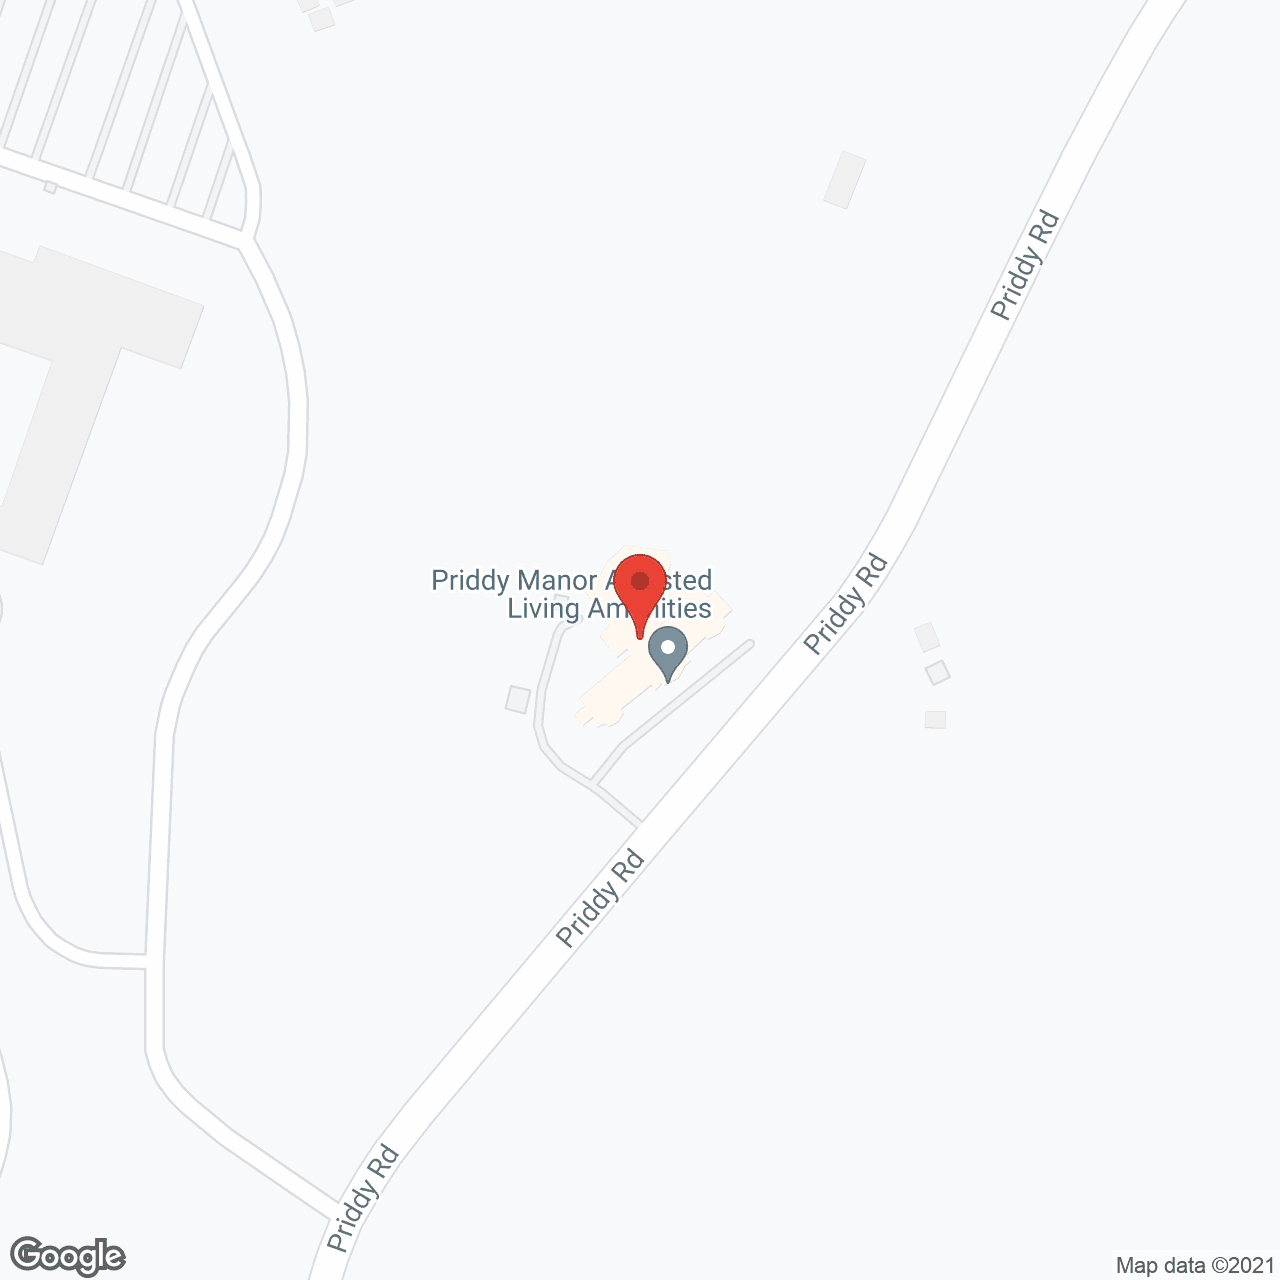 Priddy Manor Assisted Living in google map